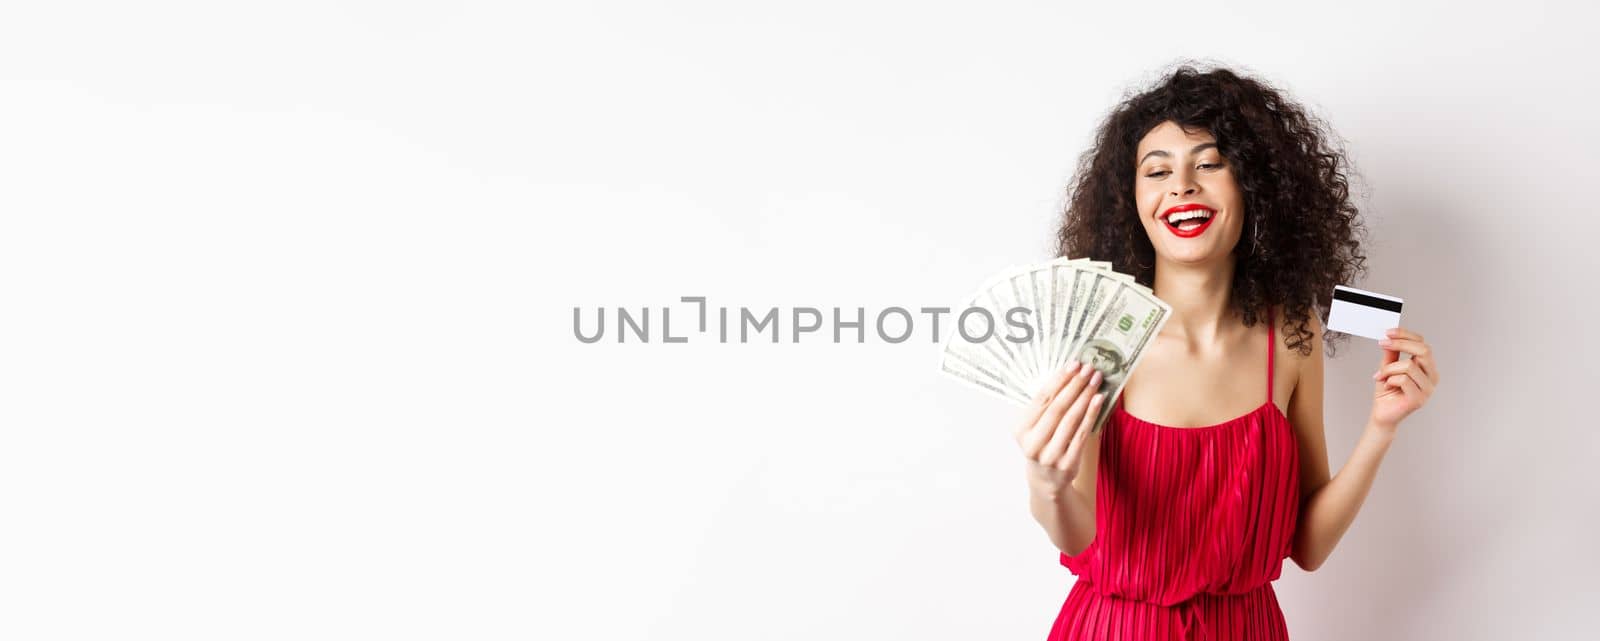 Shopping. Rich successful woman with curly hair and red dress, holding plastic credit card and looking pleased at dollar bills, white background.